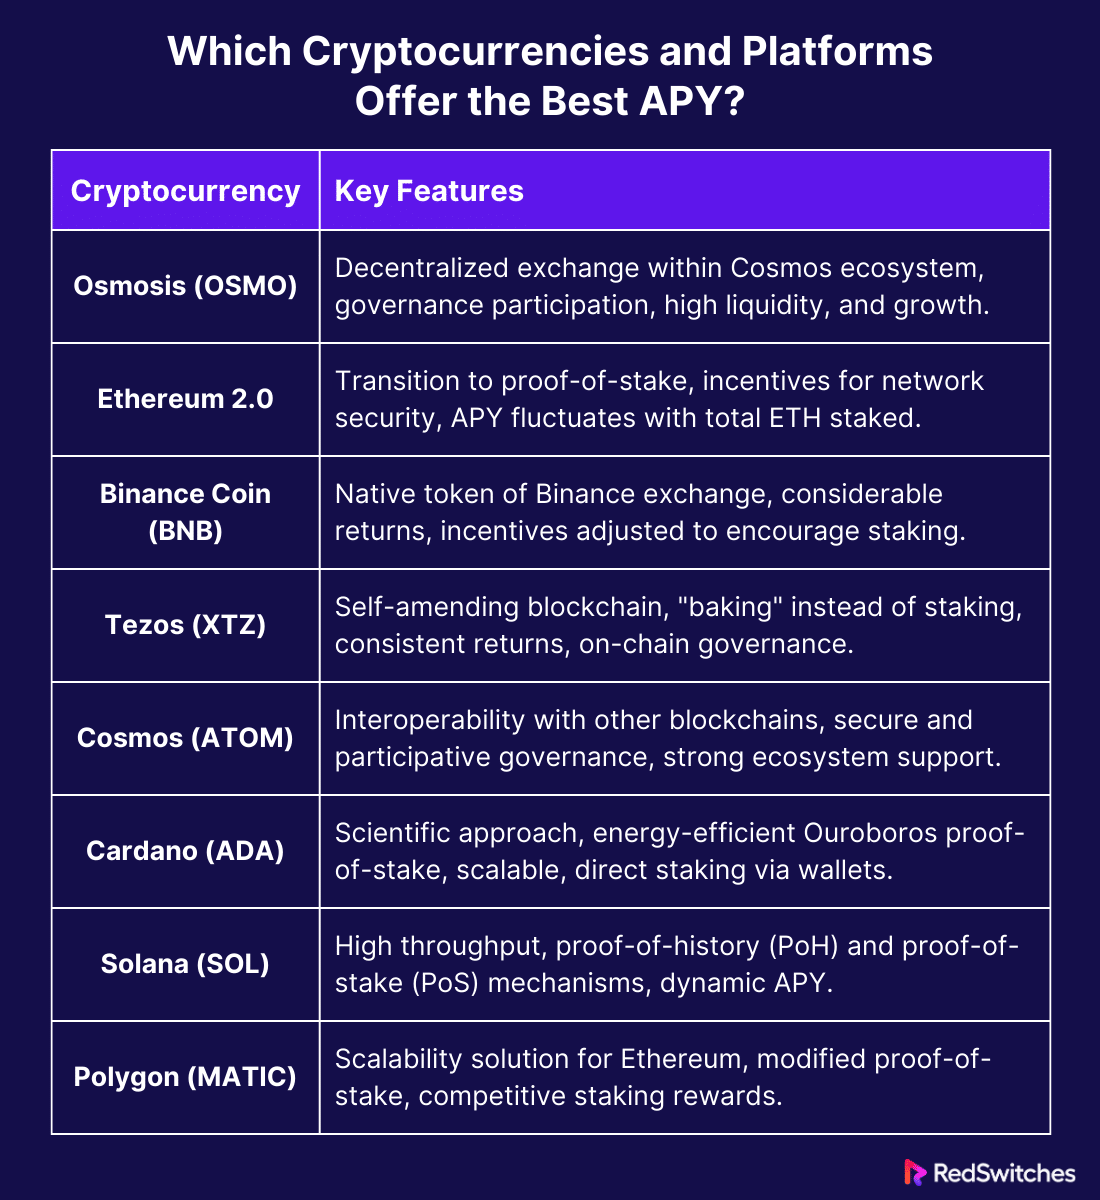 Which Cryptocurrencies and Platforms Offer the Best APY?